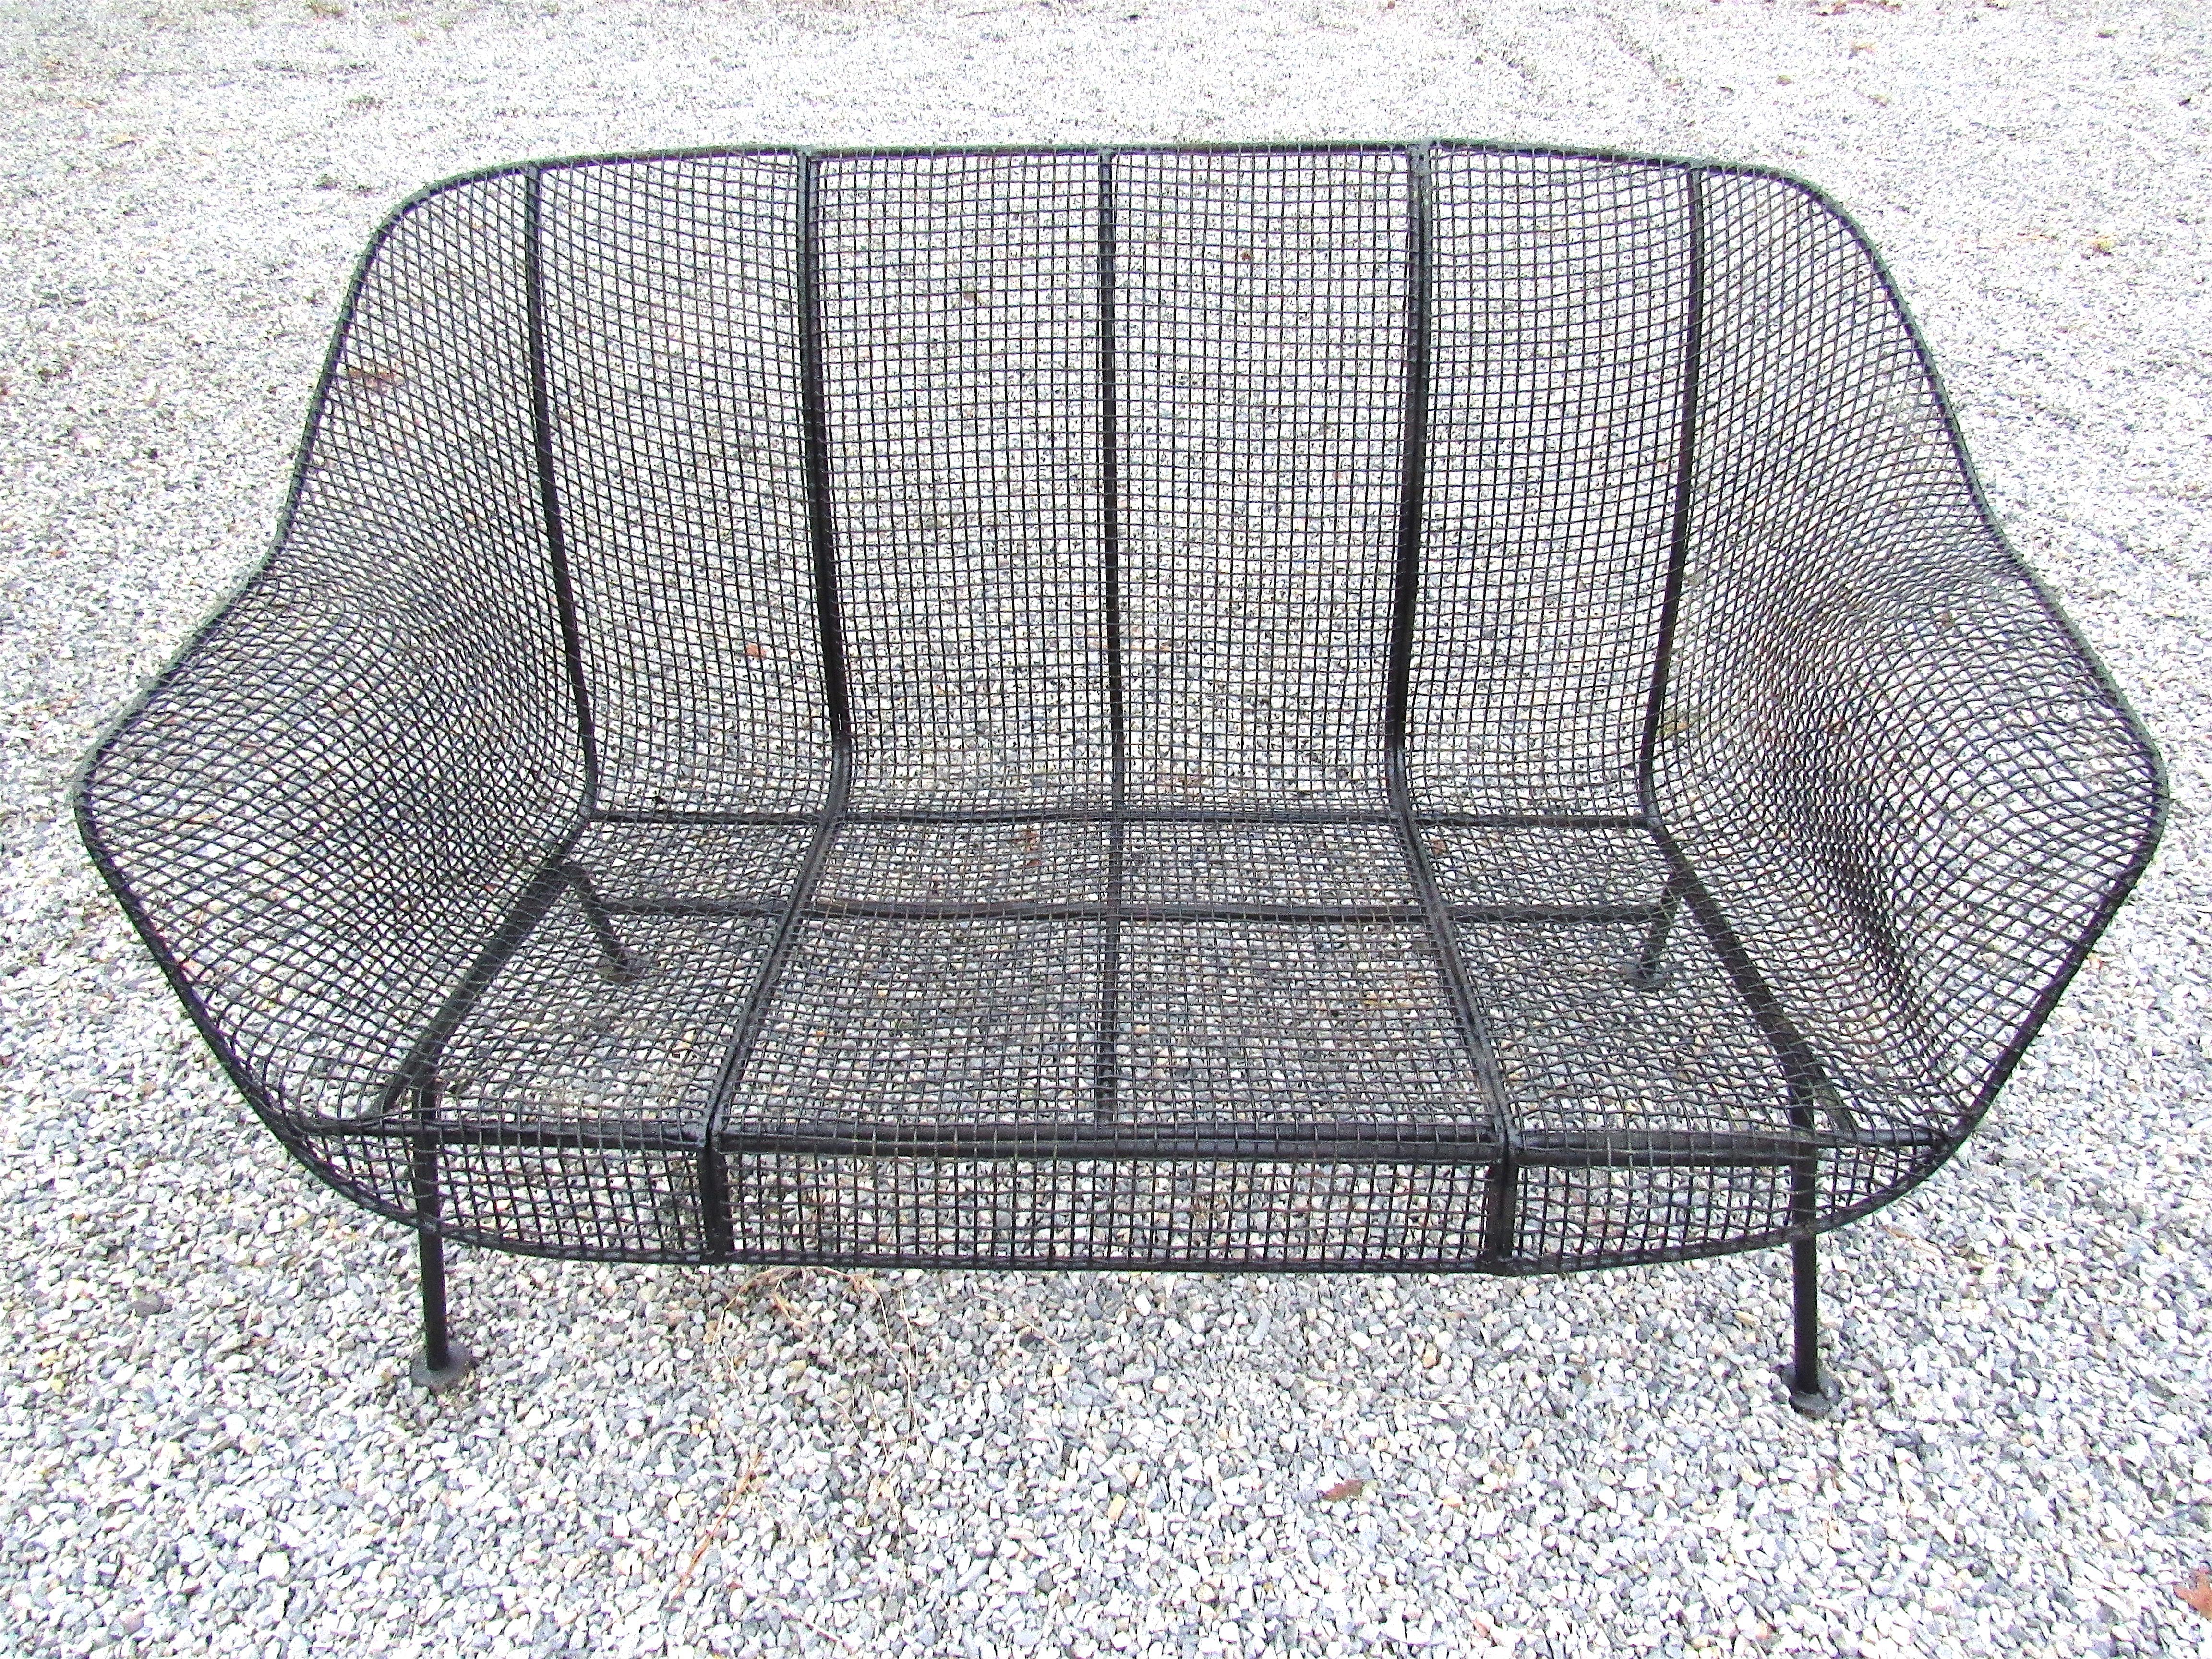 Beautiful midcentury patio set by Russell Woodard. Signature design with a wrought iron frame and wire mesh seating. Stylish set sure to make an impression. This set contains two armchairs, one settee, and 3 end tables. Suitable for both indoor and